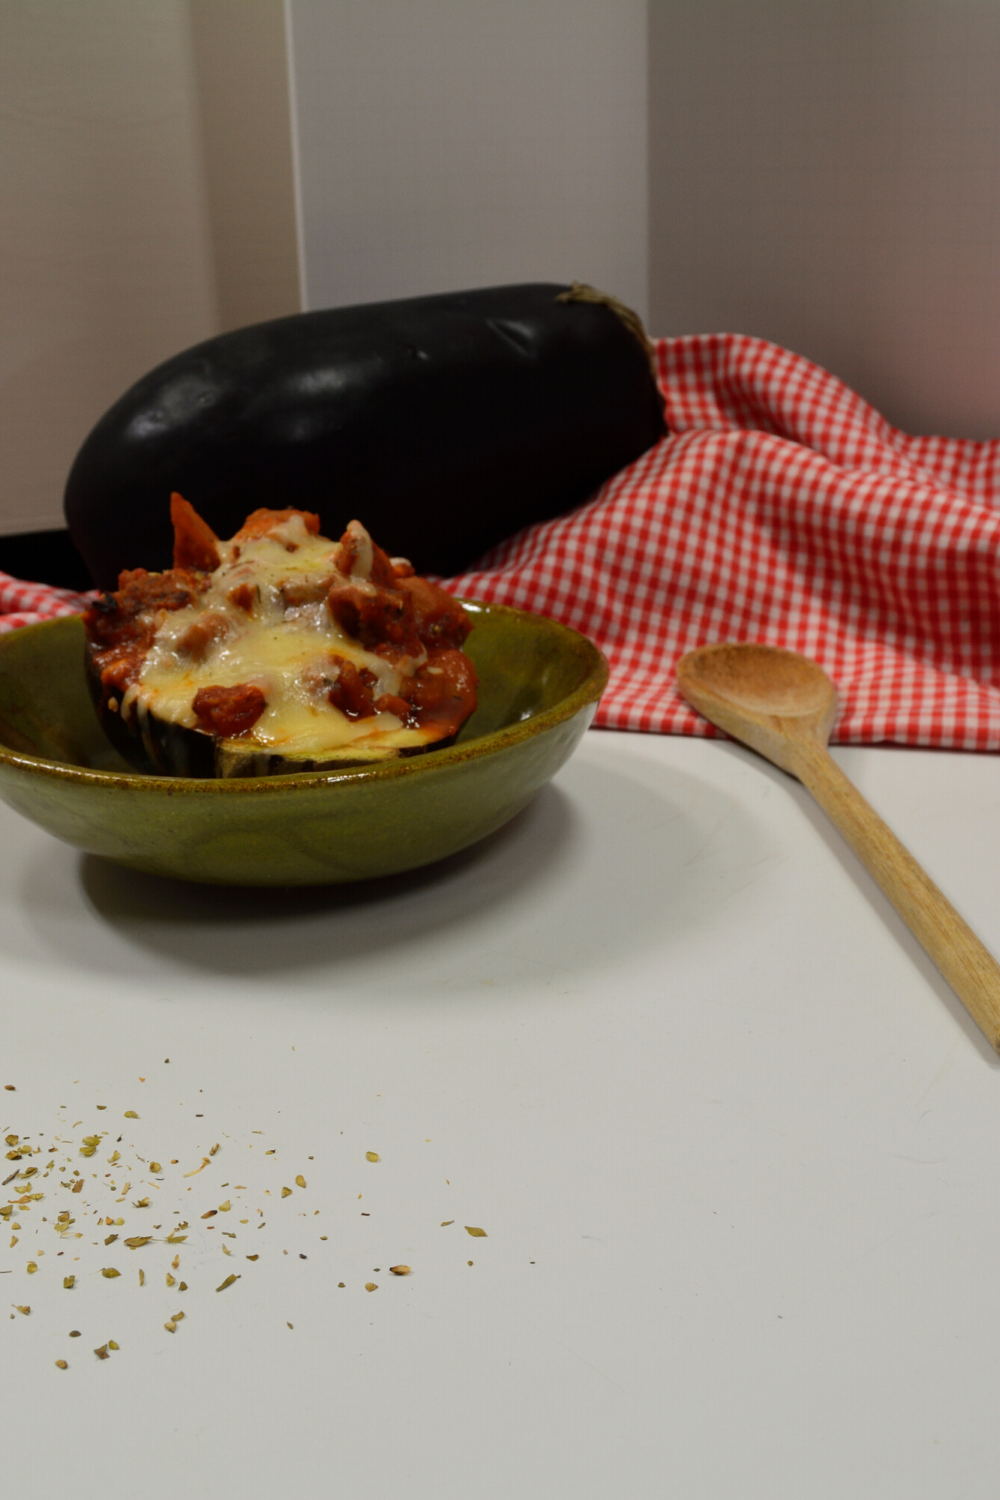 Stuffed Eggplant in a homemade green ceramic bowl with a wooden spoon to the right and a checkered red and white cloth behind with a whole eggplant on top